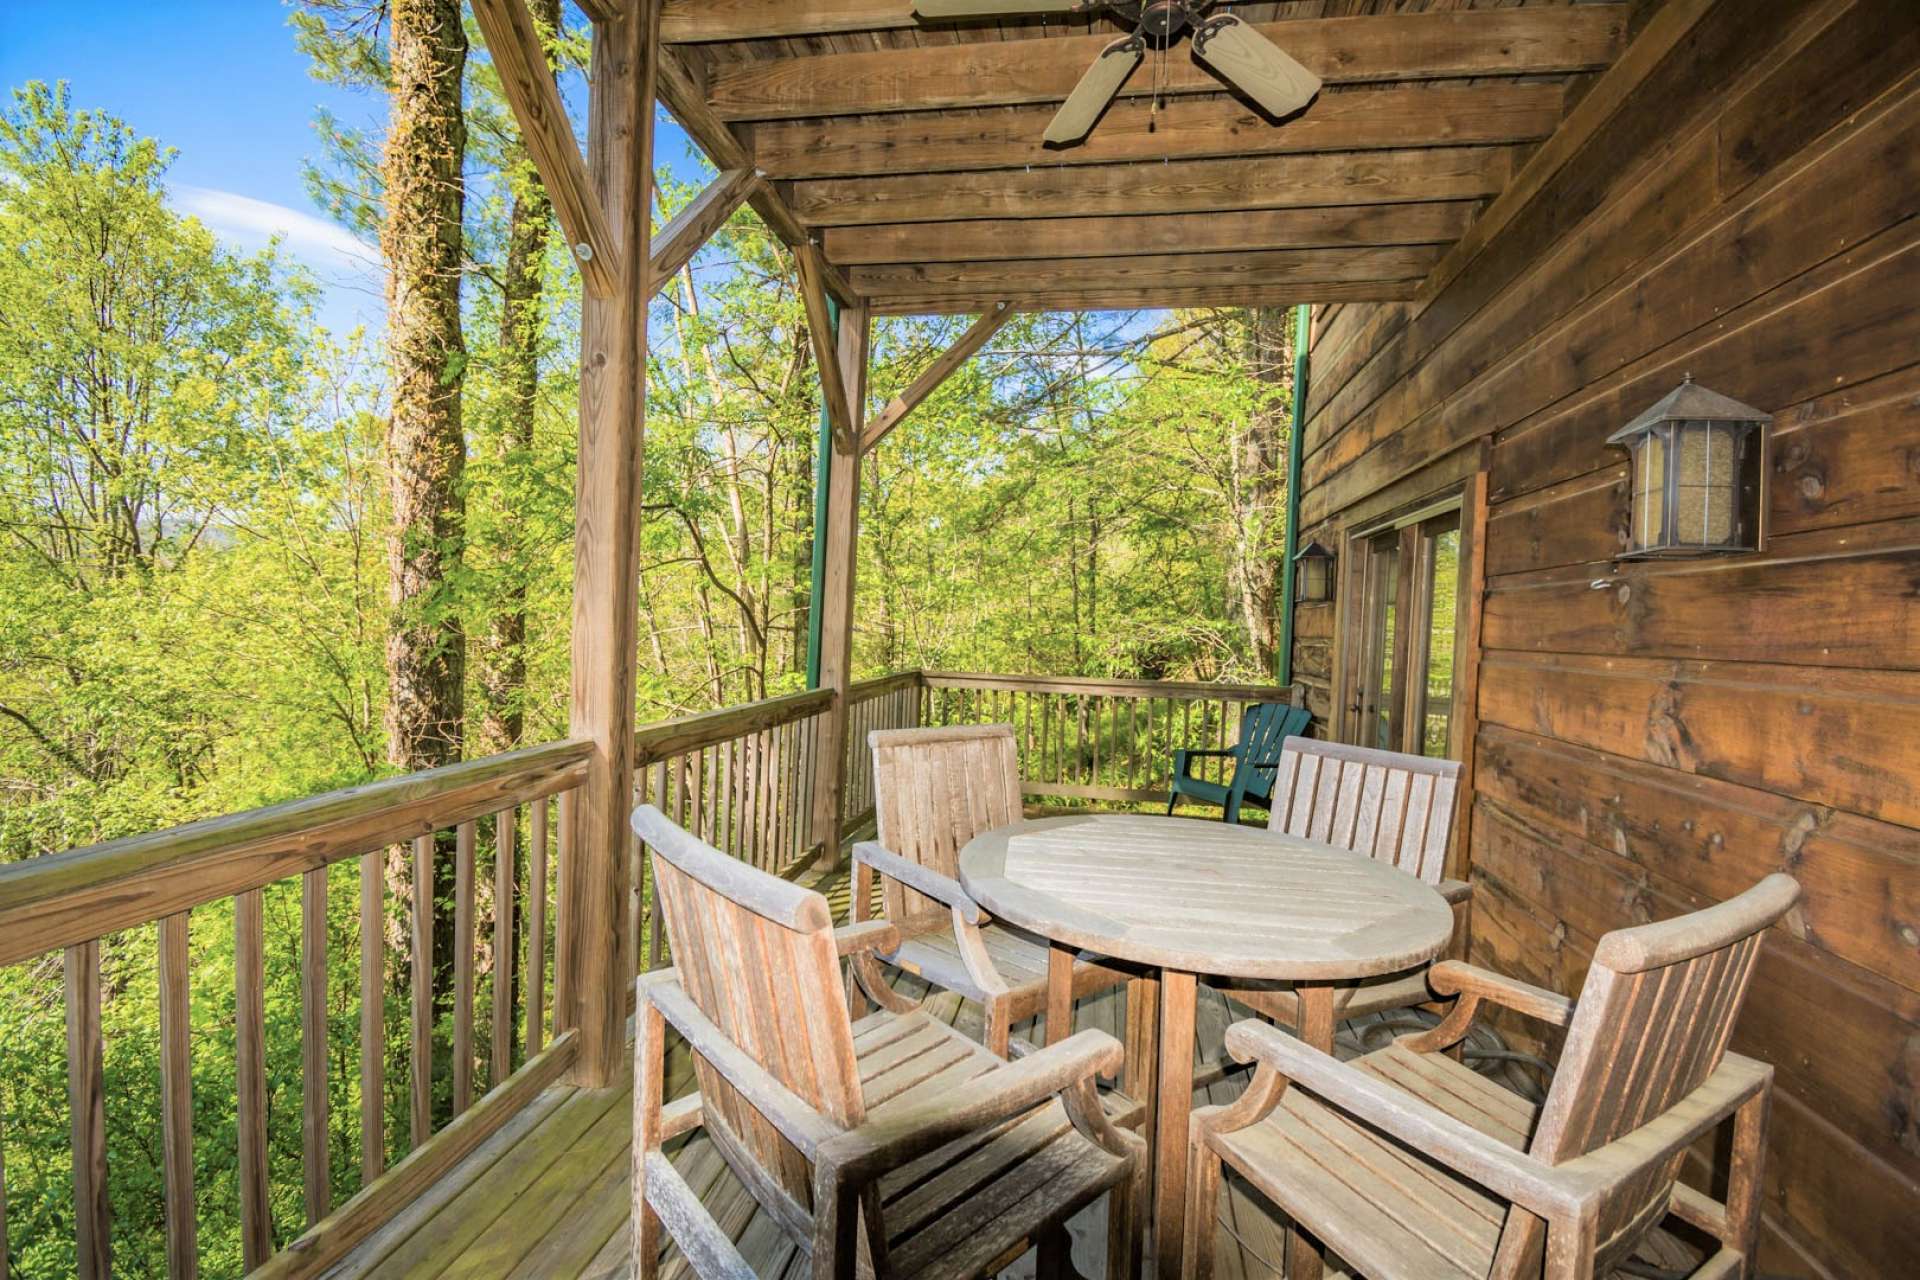 Your guests will enjoy their privacy on the lower level with access to the lower level deck and views.  In addition, this cabin features a concrete slab crawl space for additional storage of your mountain toys.